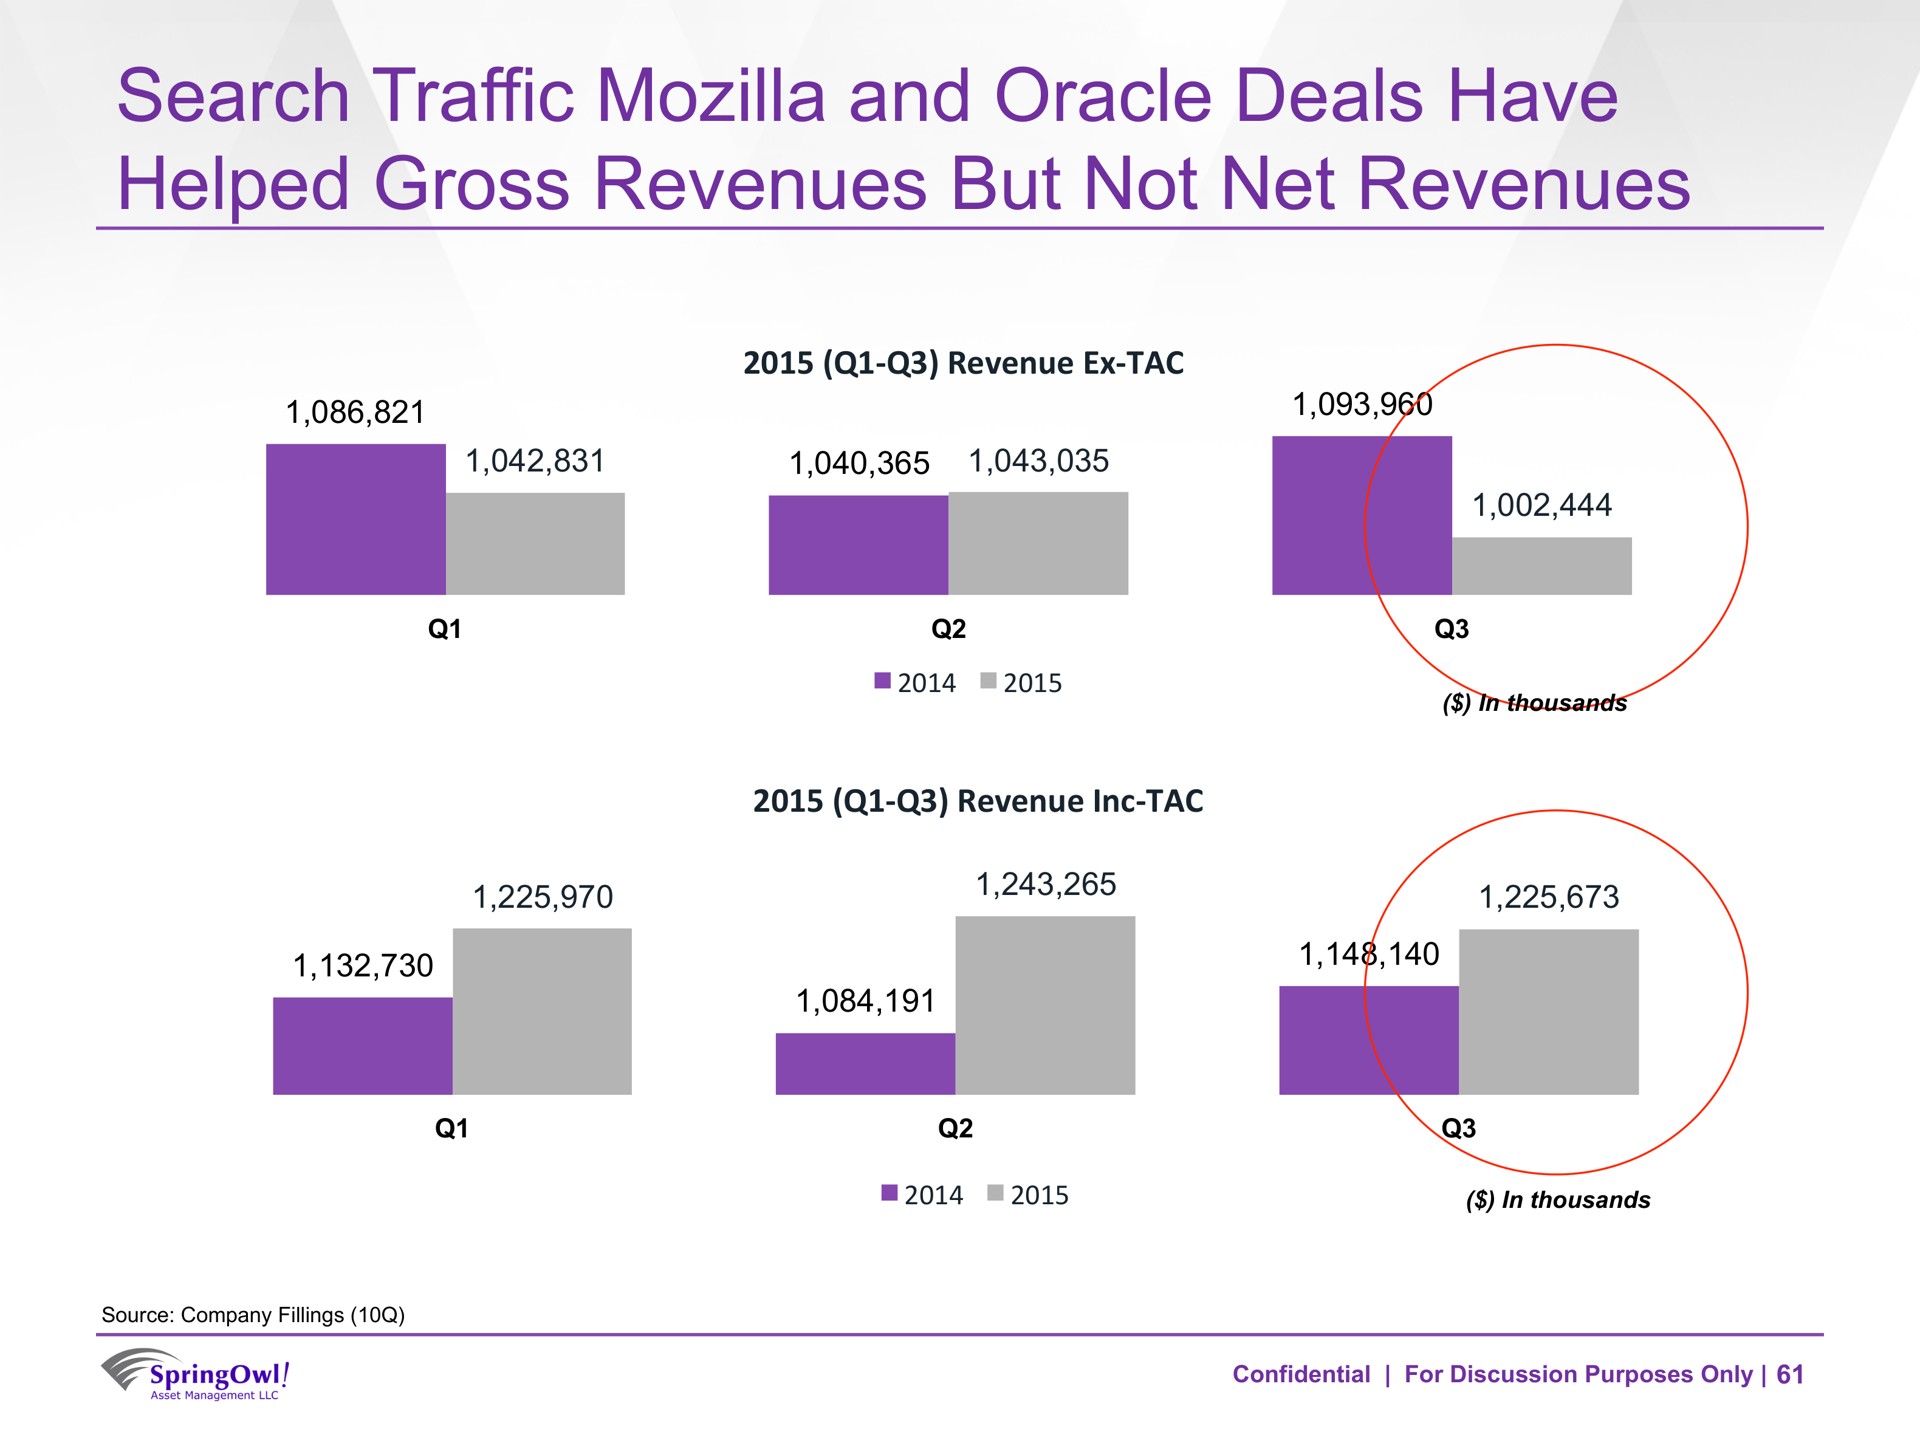 search traffic and oracle deals have helped gross revenues but not net revenues | SpringOwl